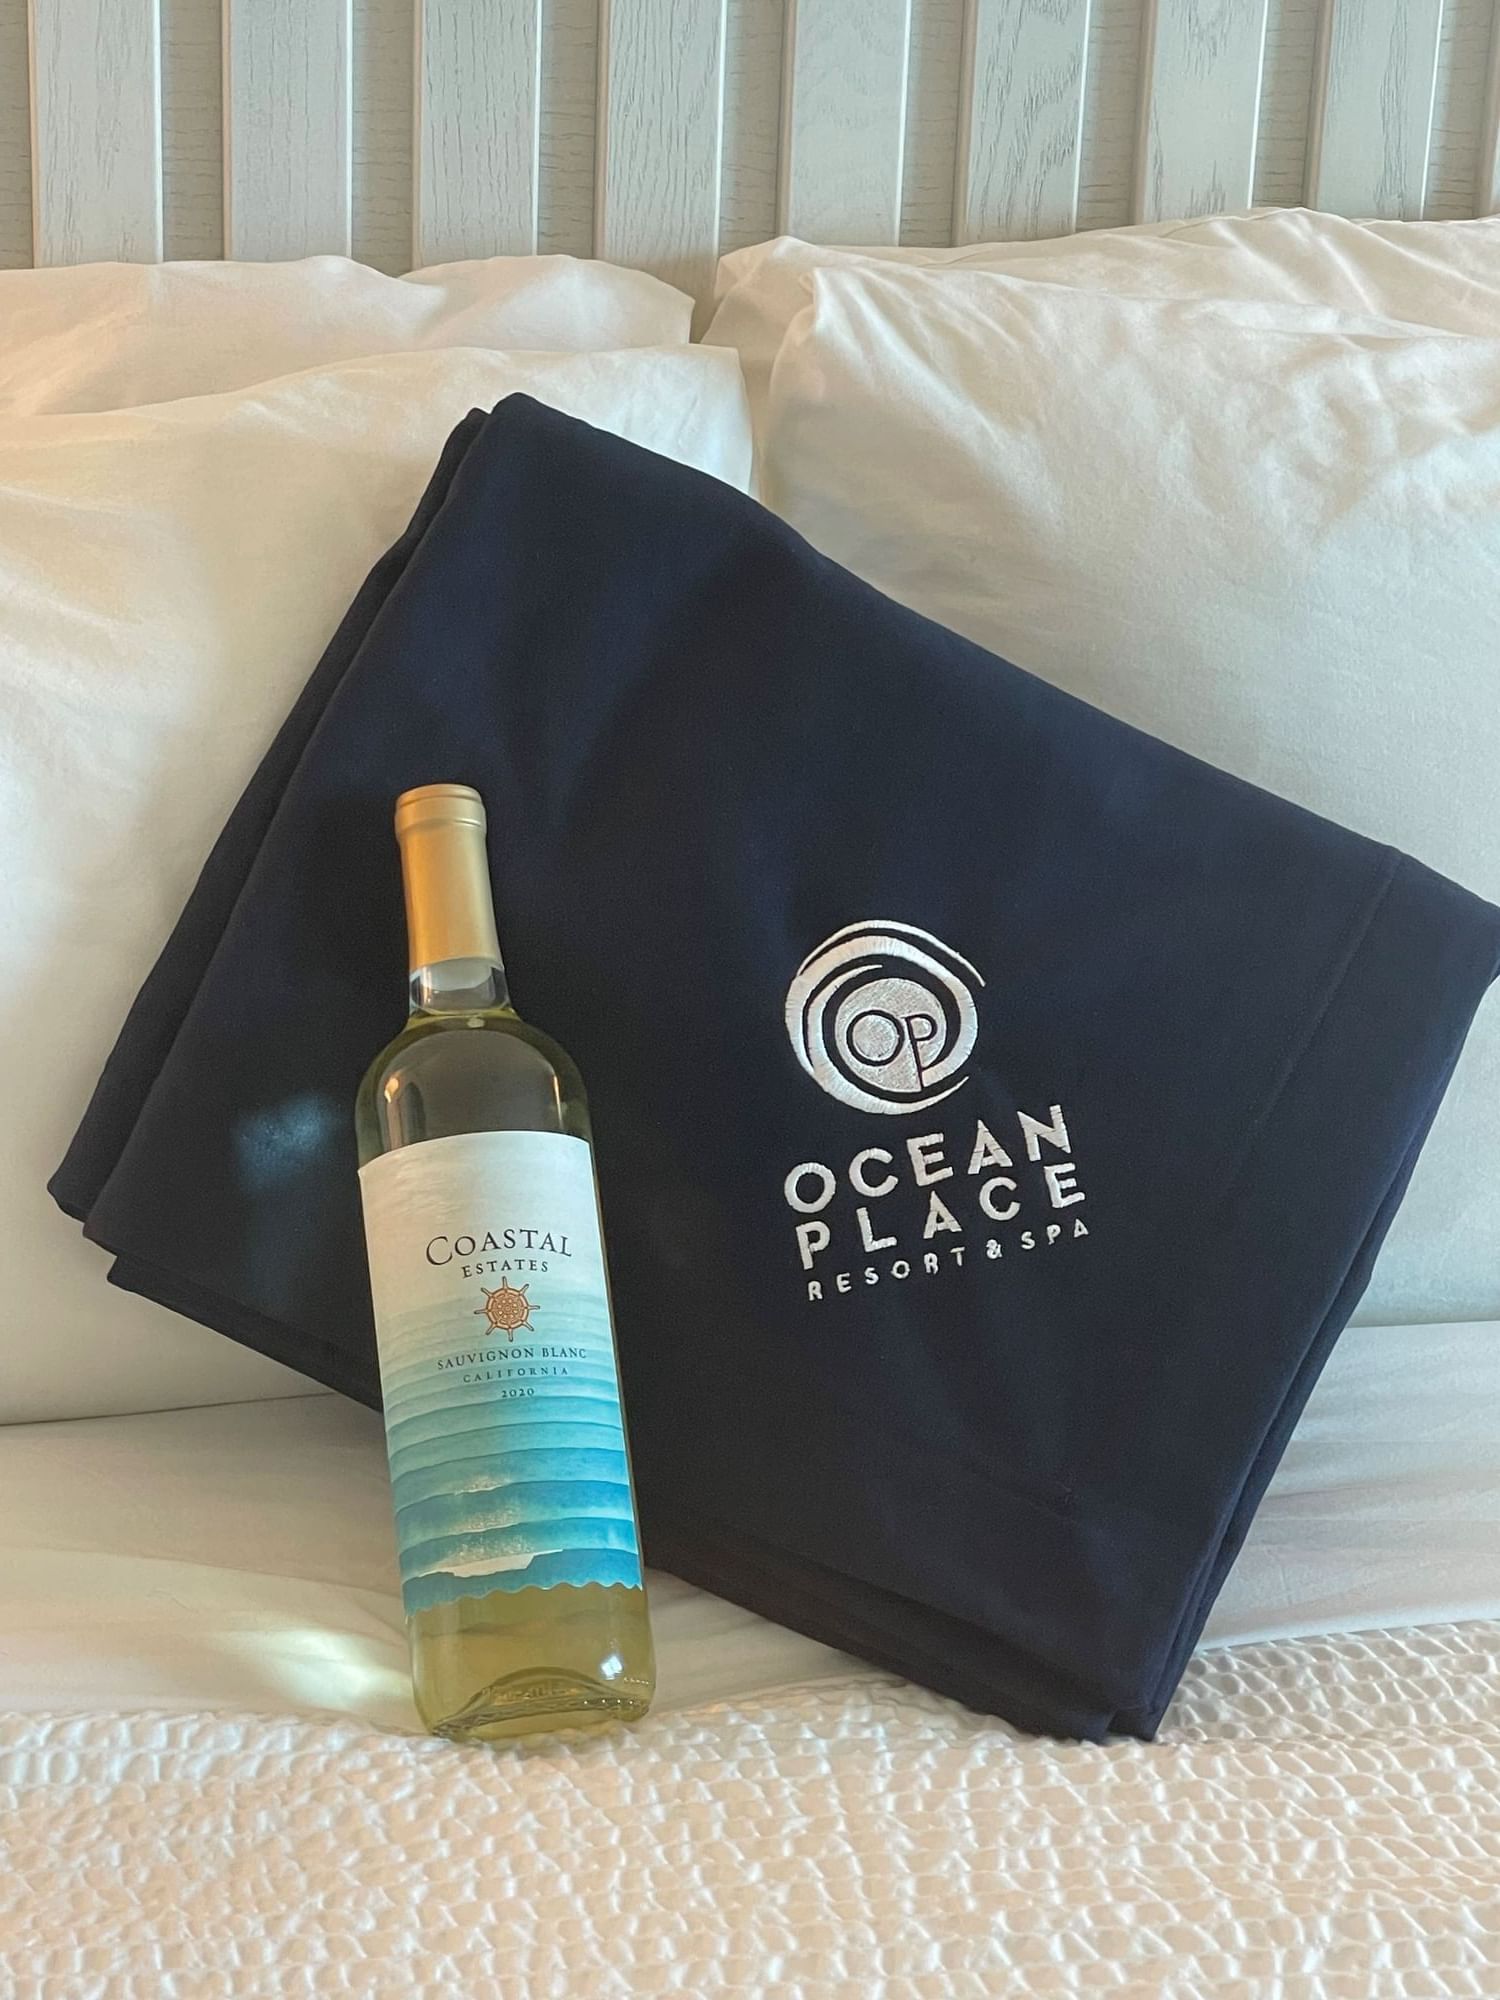 Ocean Place branded blanket in navy and a bottle of wine